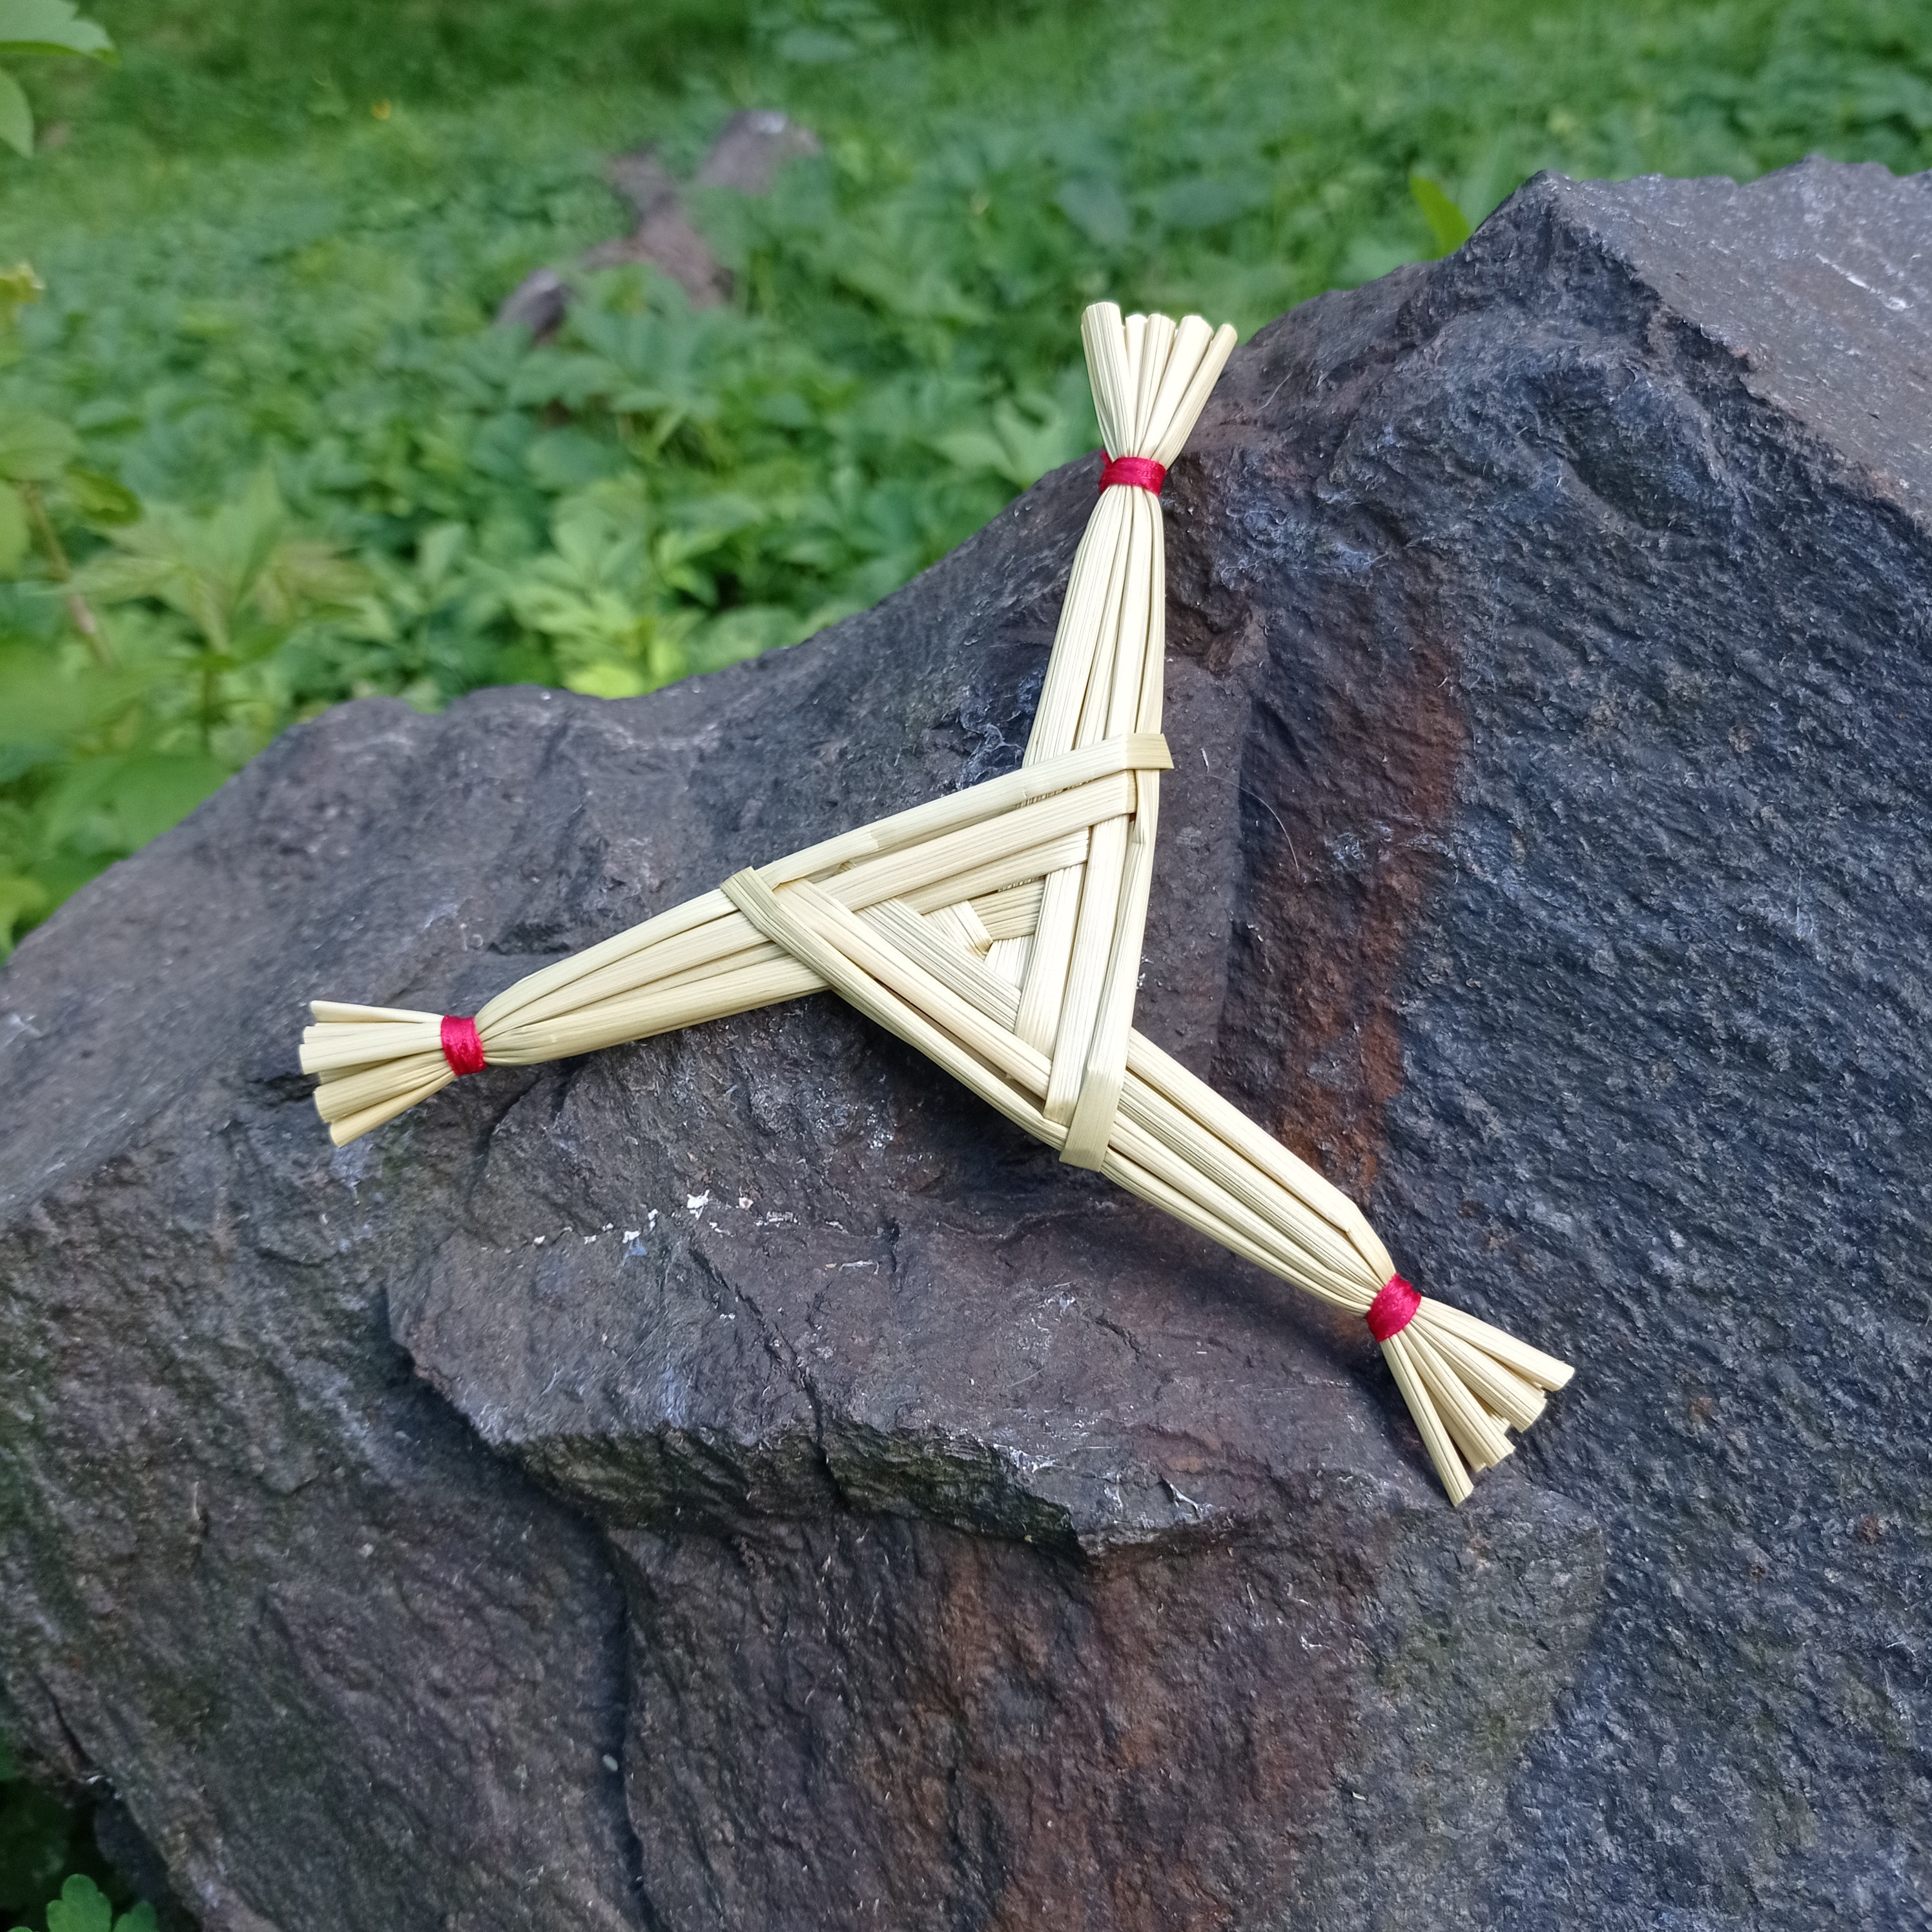 folklore.ie - St. Brigid's Crosses with Straw Bows, Co.